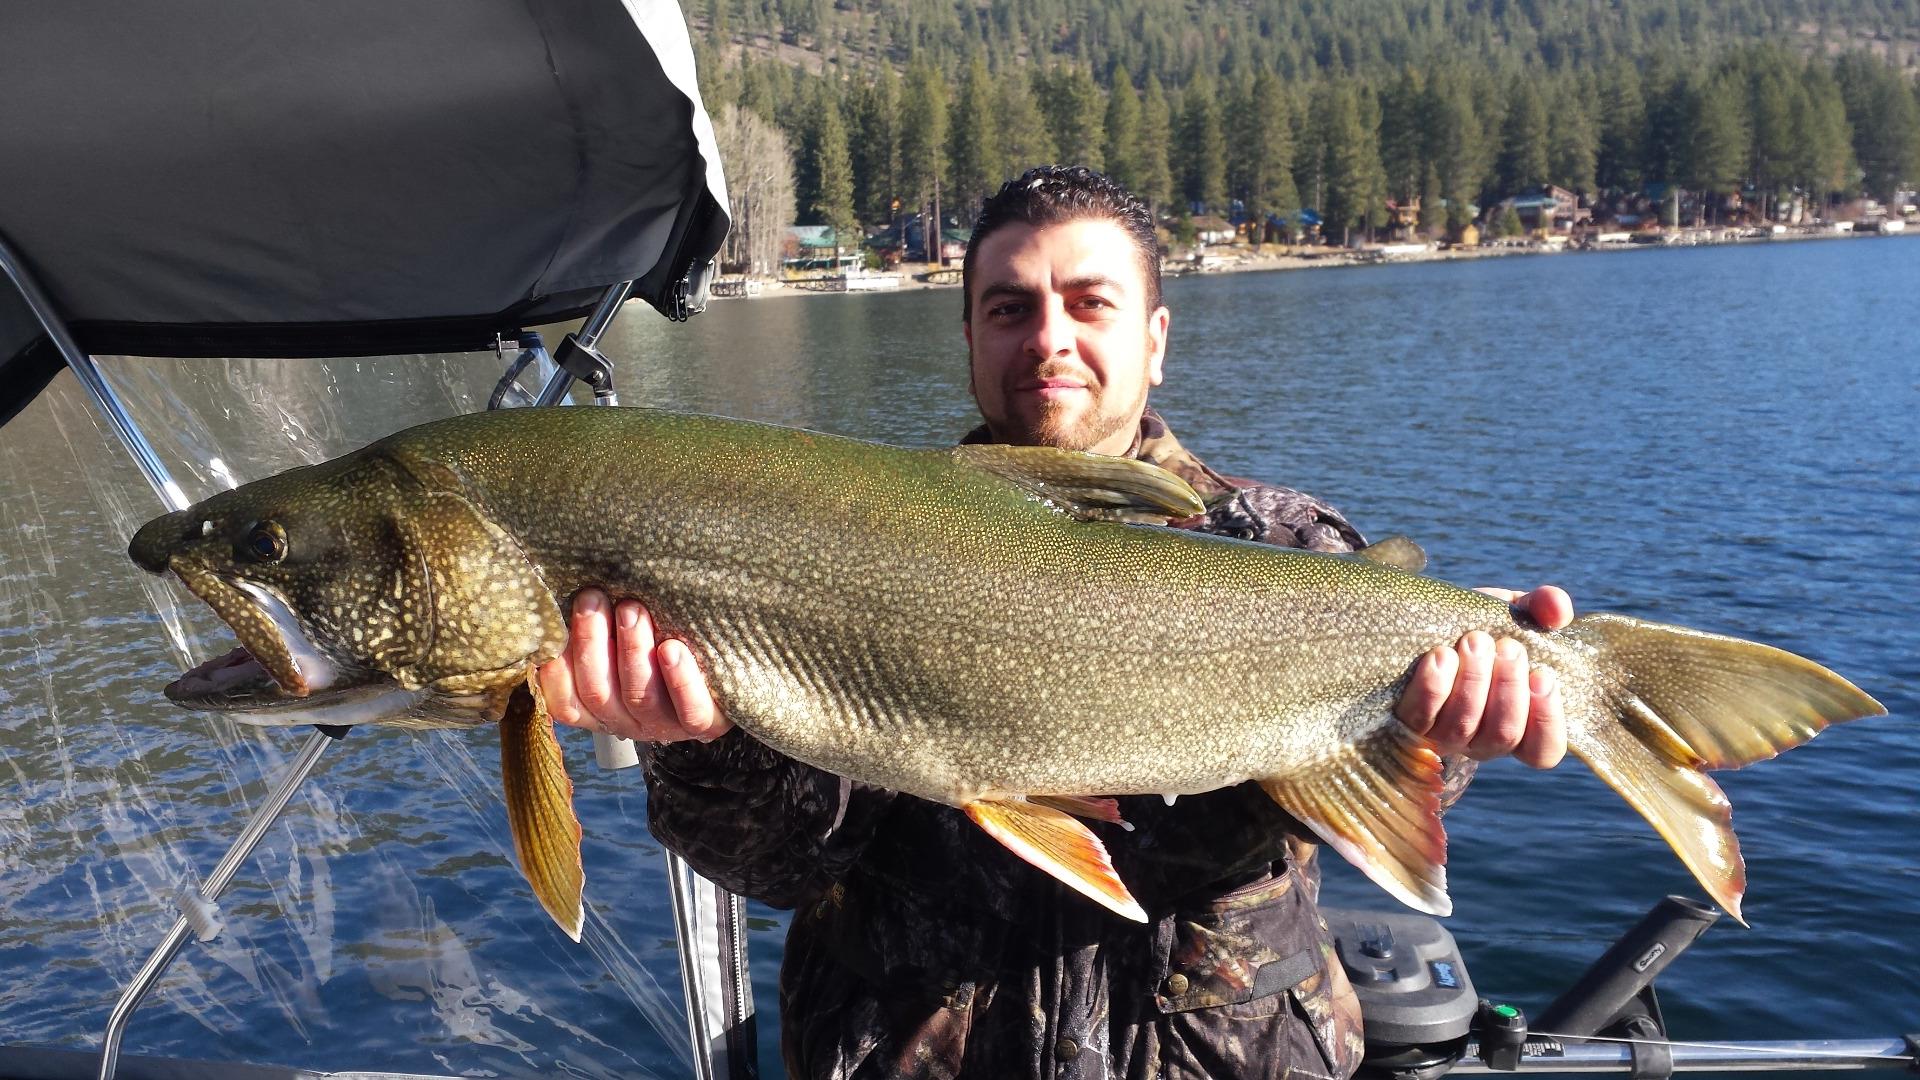 Fish reports, Fishing, Trout, Fly Fishing, Angling, Eastern Sierras, CA, Ca...